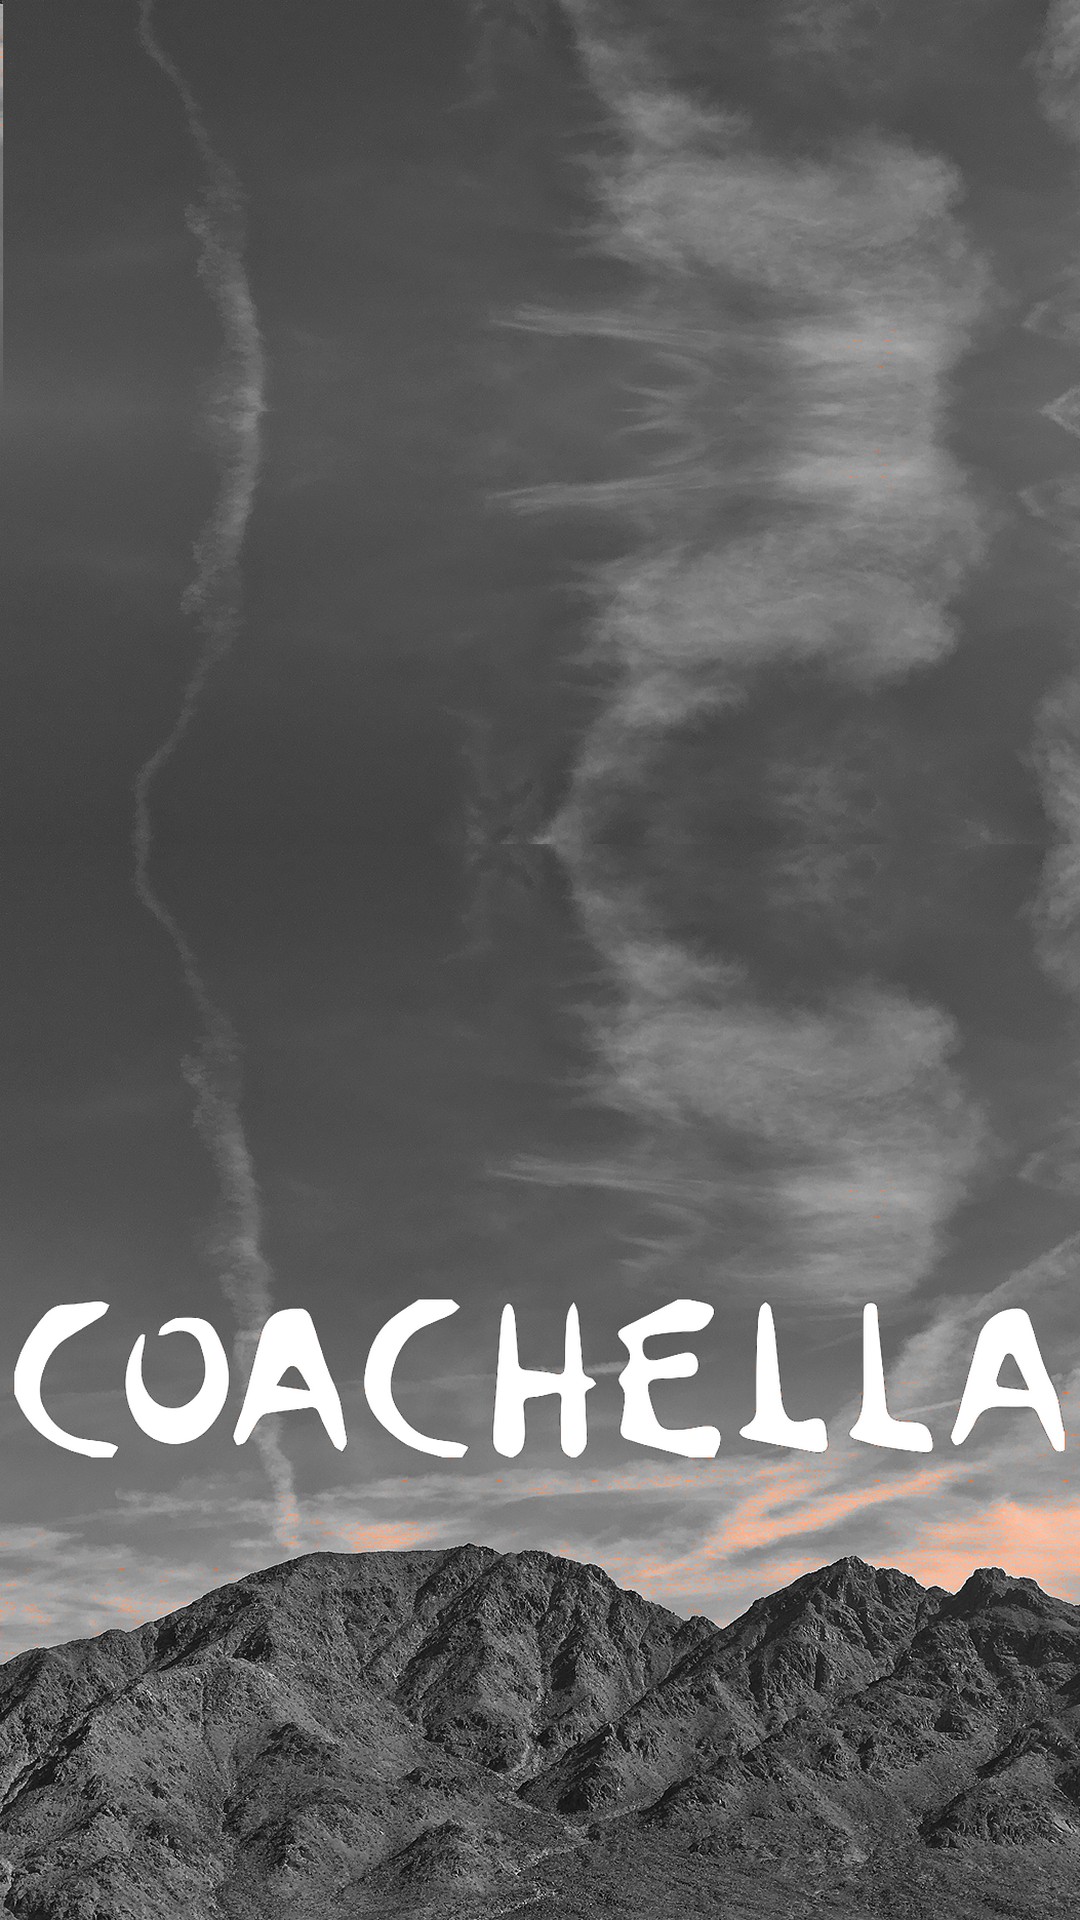 Coachella 2019 Wallpaper For Phone HD With high-resolution 1080X1920 pixel. Download all Mobile Wallpapers and Use them as wallpapers for your iPhone, Tablet, iPad, Android and other mobile devices